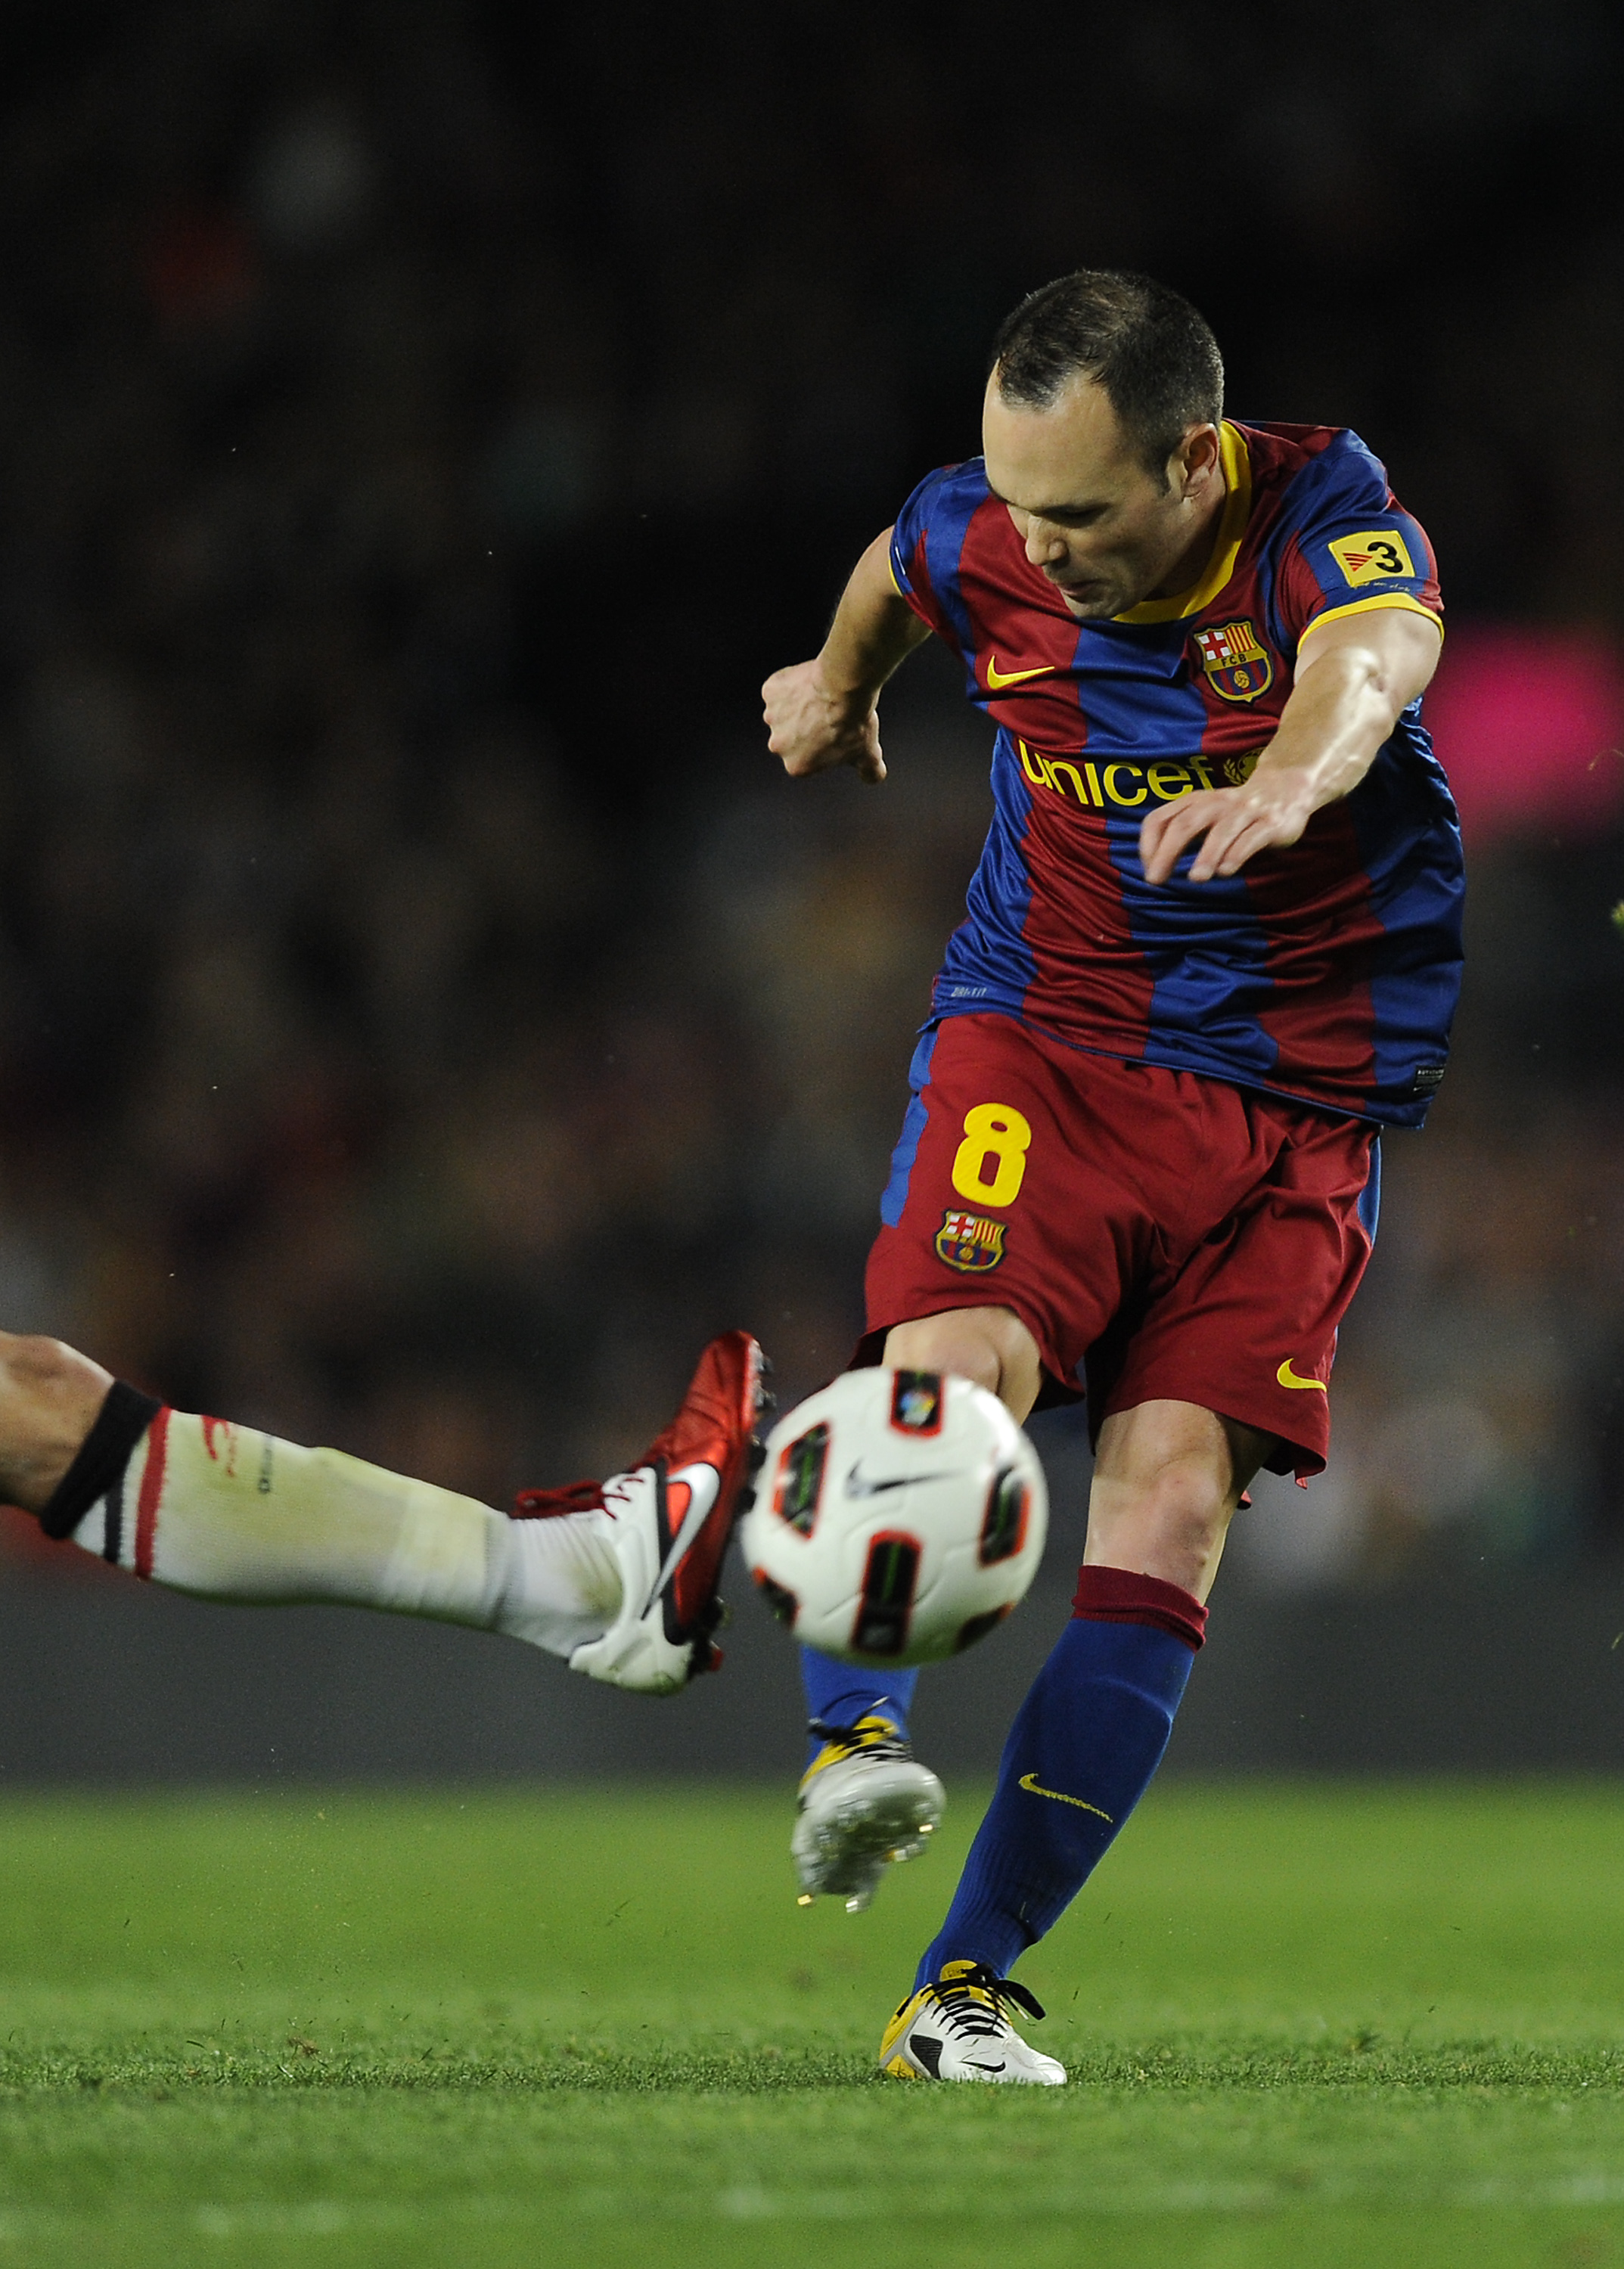 BARCELONA, SPAIN - APRIL 23:  Andres Iniesta of FC Barcelona (C) shoots towards goal during the La Liga match between Barcelona and CA Osasuna at Camp Nou Stadium on April 23, 2011 in Barcelona, Spain. Barcelona won 2-0.  (Photo by David Ramos/Getty Image